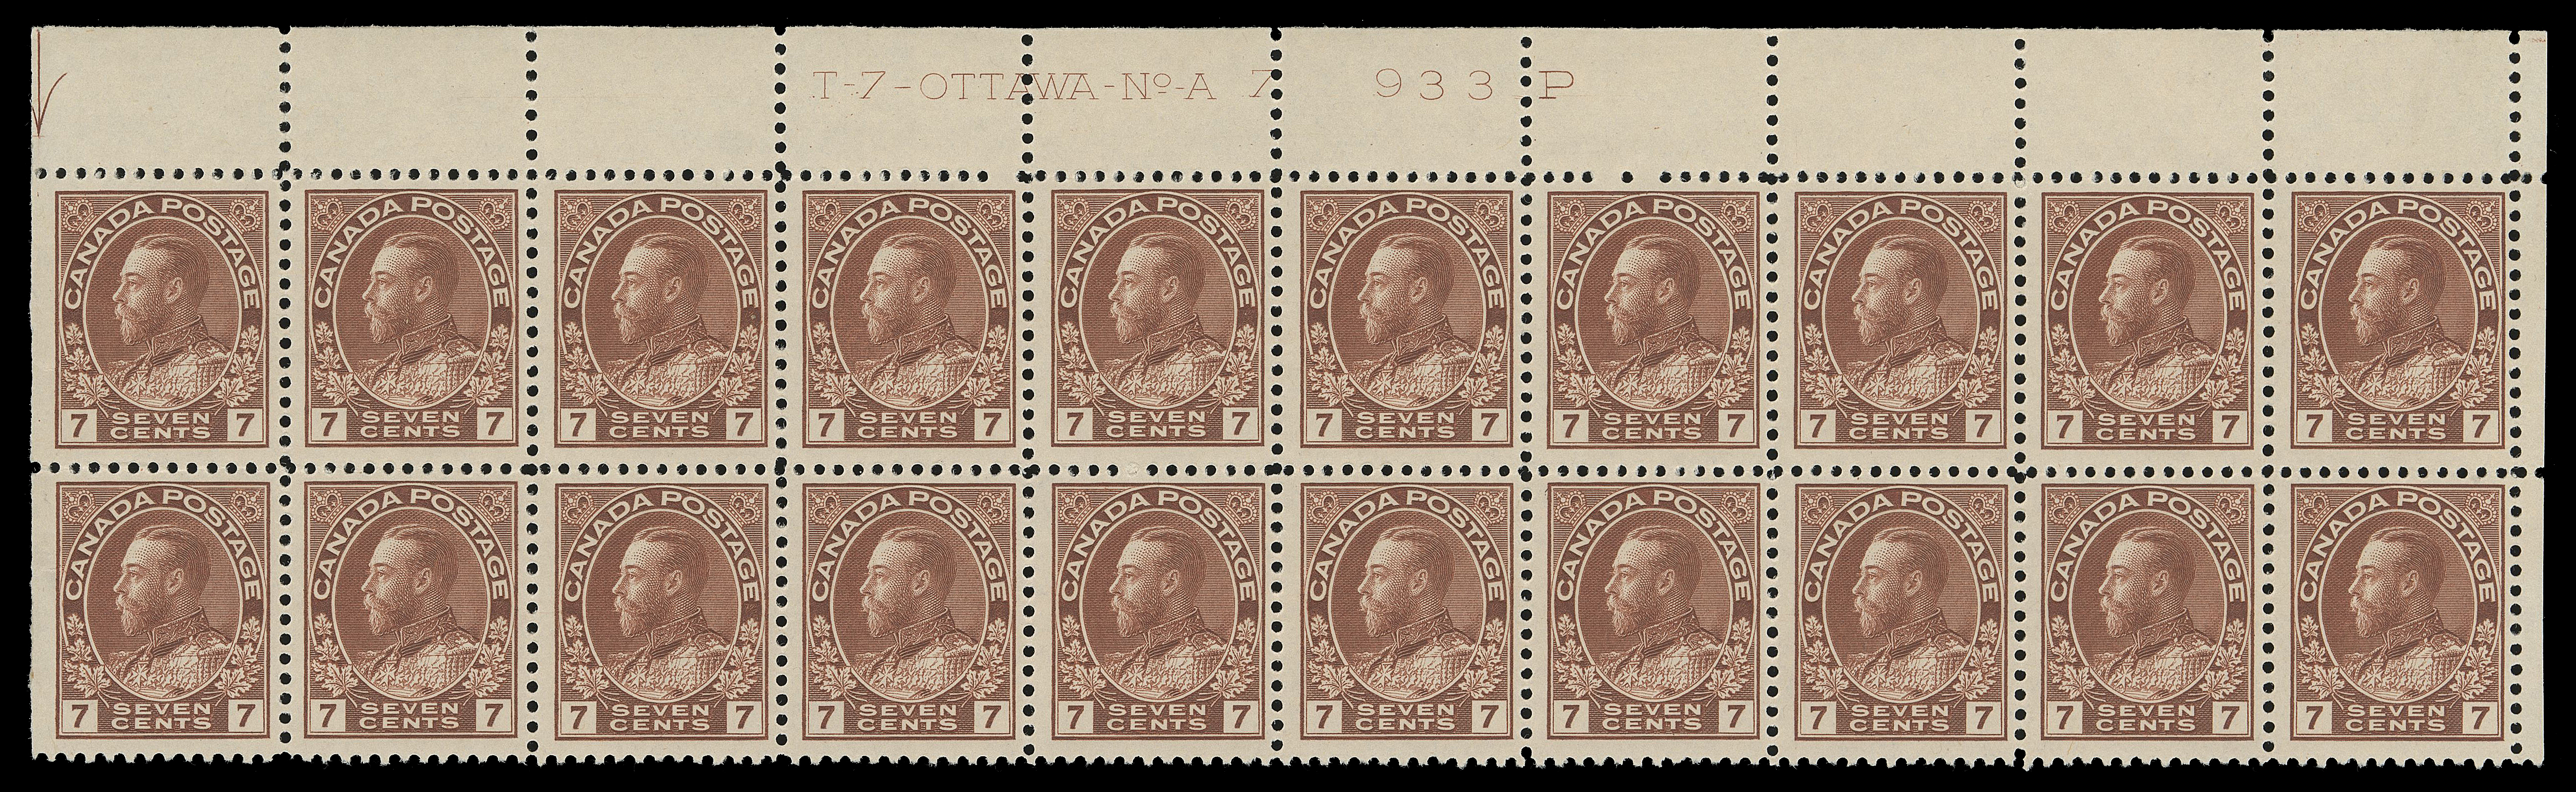 ADMIRAL STAMPS  114,Upper right Plate 7 block of twenty with bright fresh colour, reasonably centered, LH on straight edge stamps at left an upper right stamp, leaving seventeen NH, F-VF and scarce (Unitrade cat. $1,165)